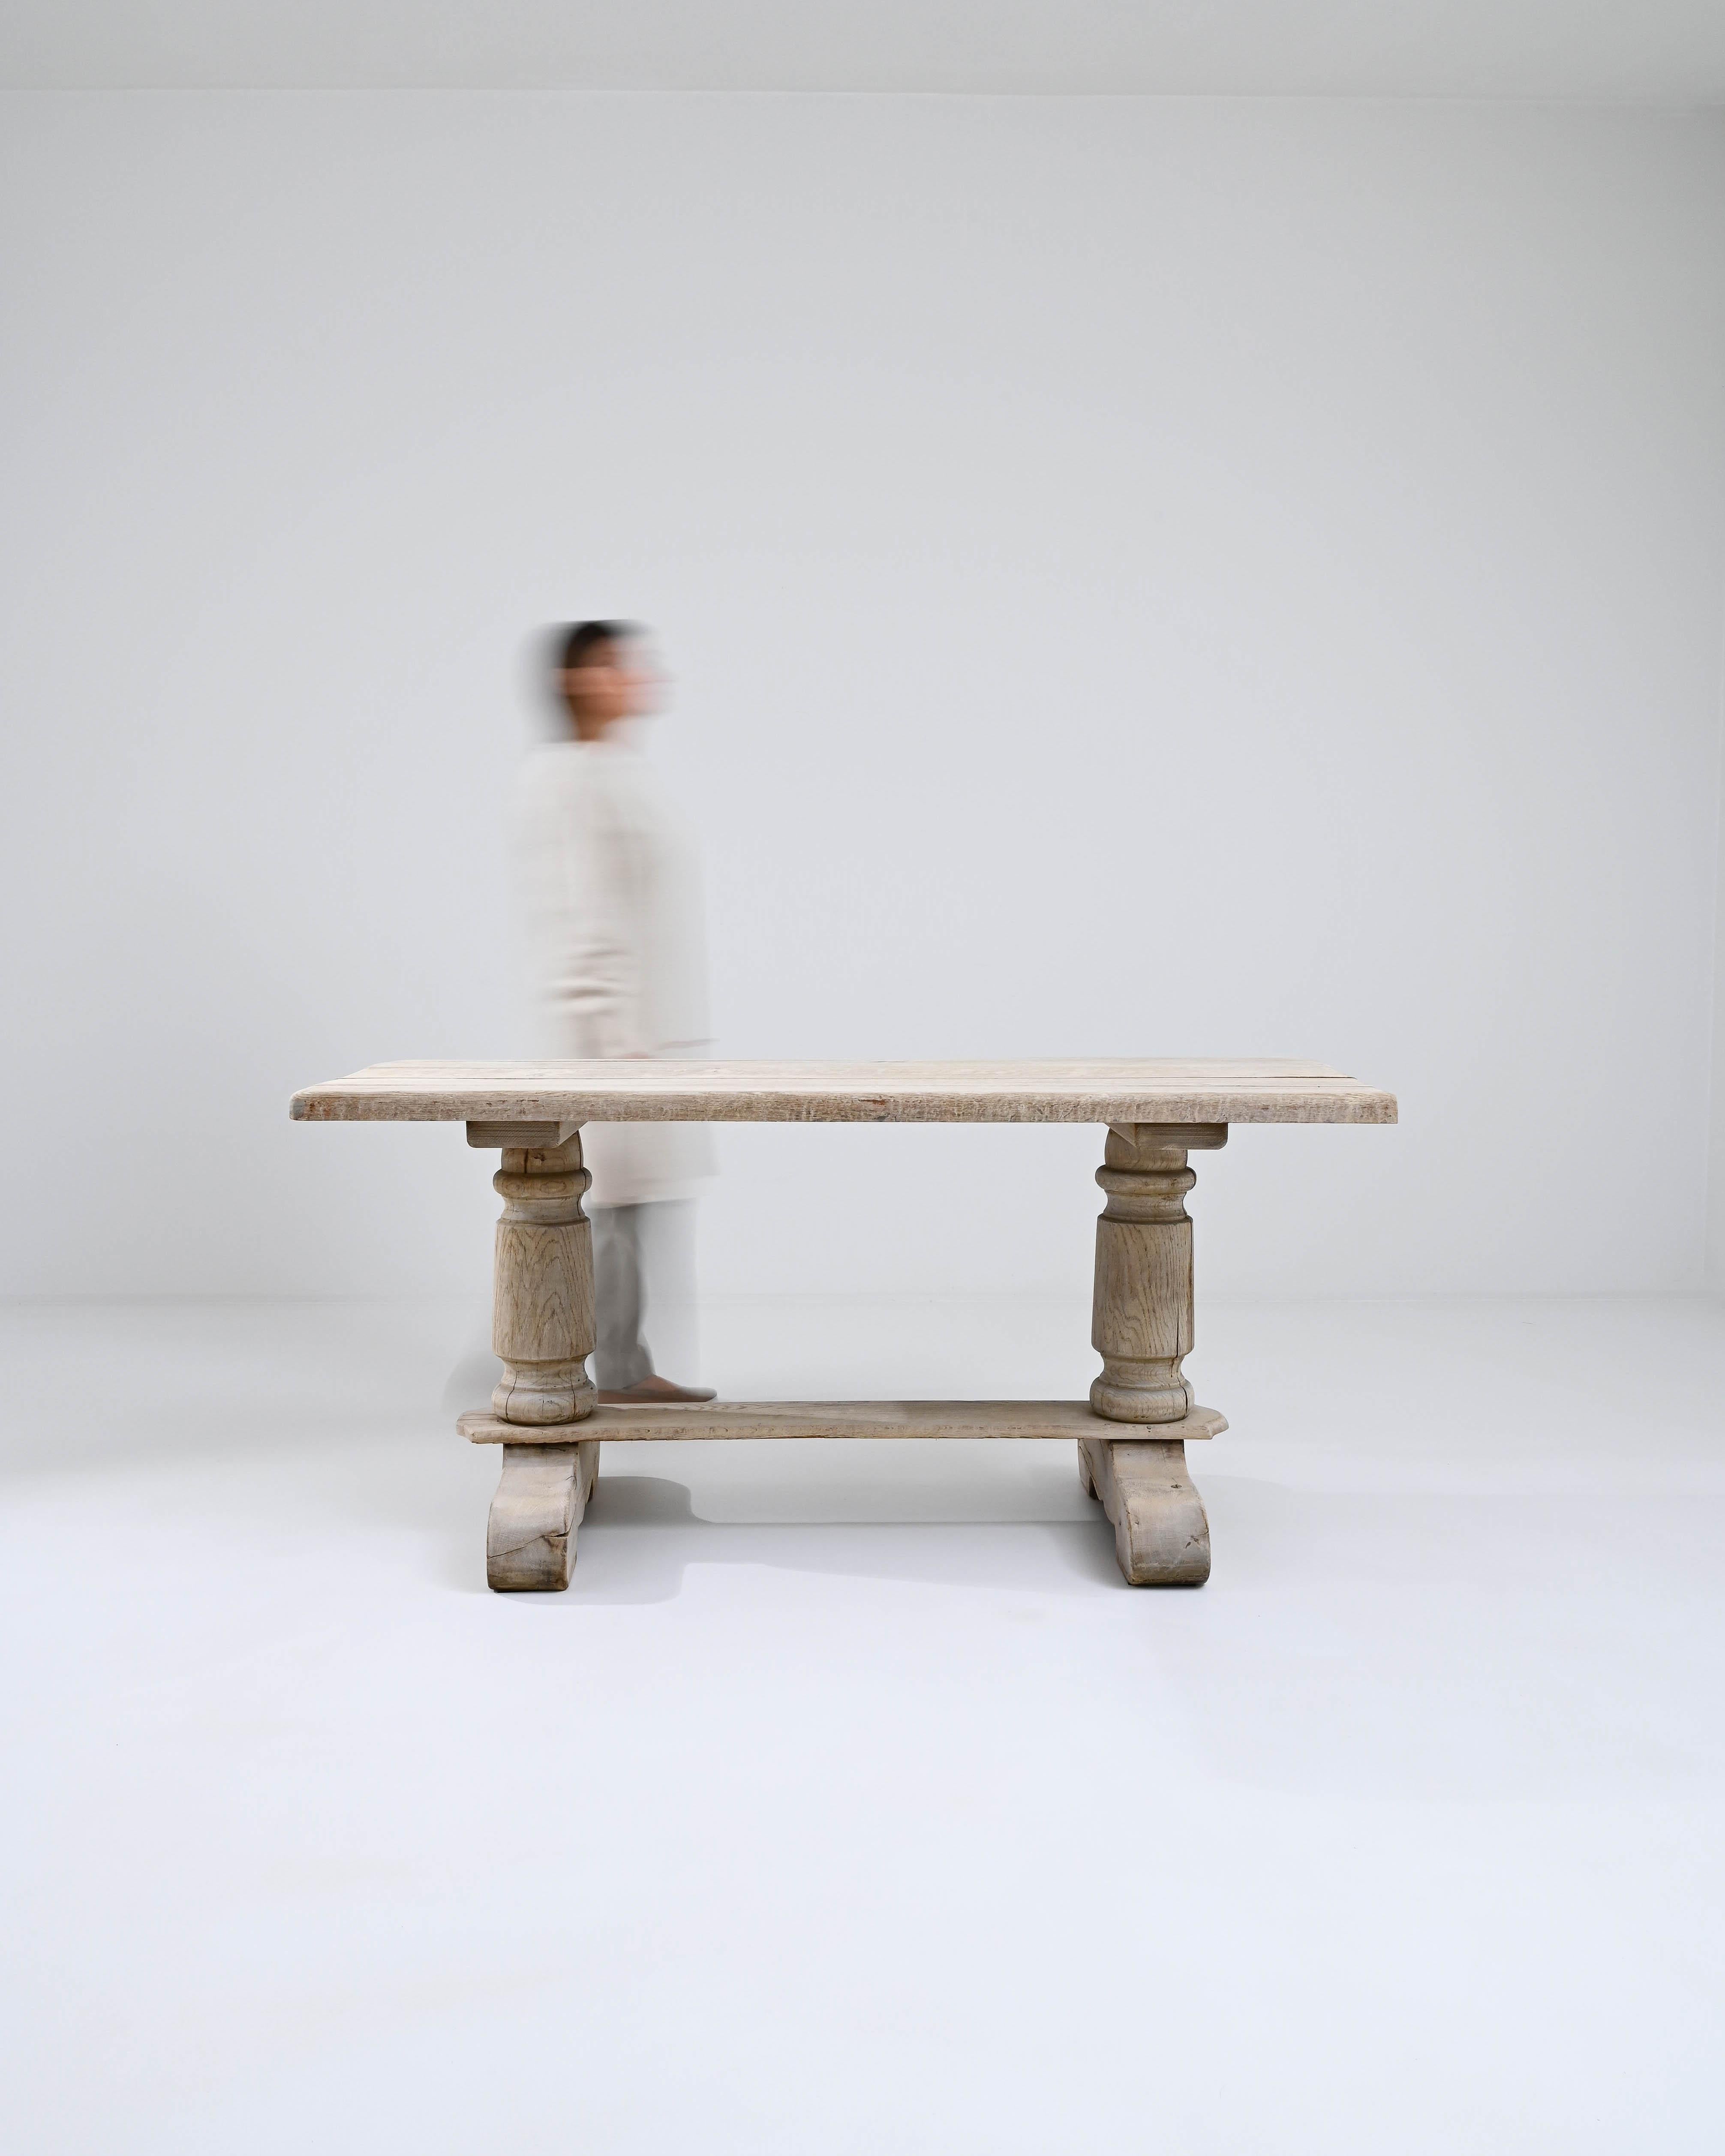 This 20th Century Belgian dining table is a testament to timeless craftsmanship and minimalist style. Crafted from bleached oak, its natural grain and soft, muted tones offer a serene dining experience. The table stands on robust, elegantly turned